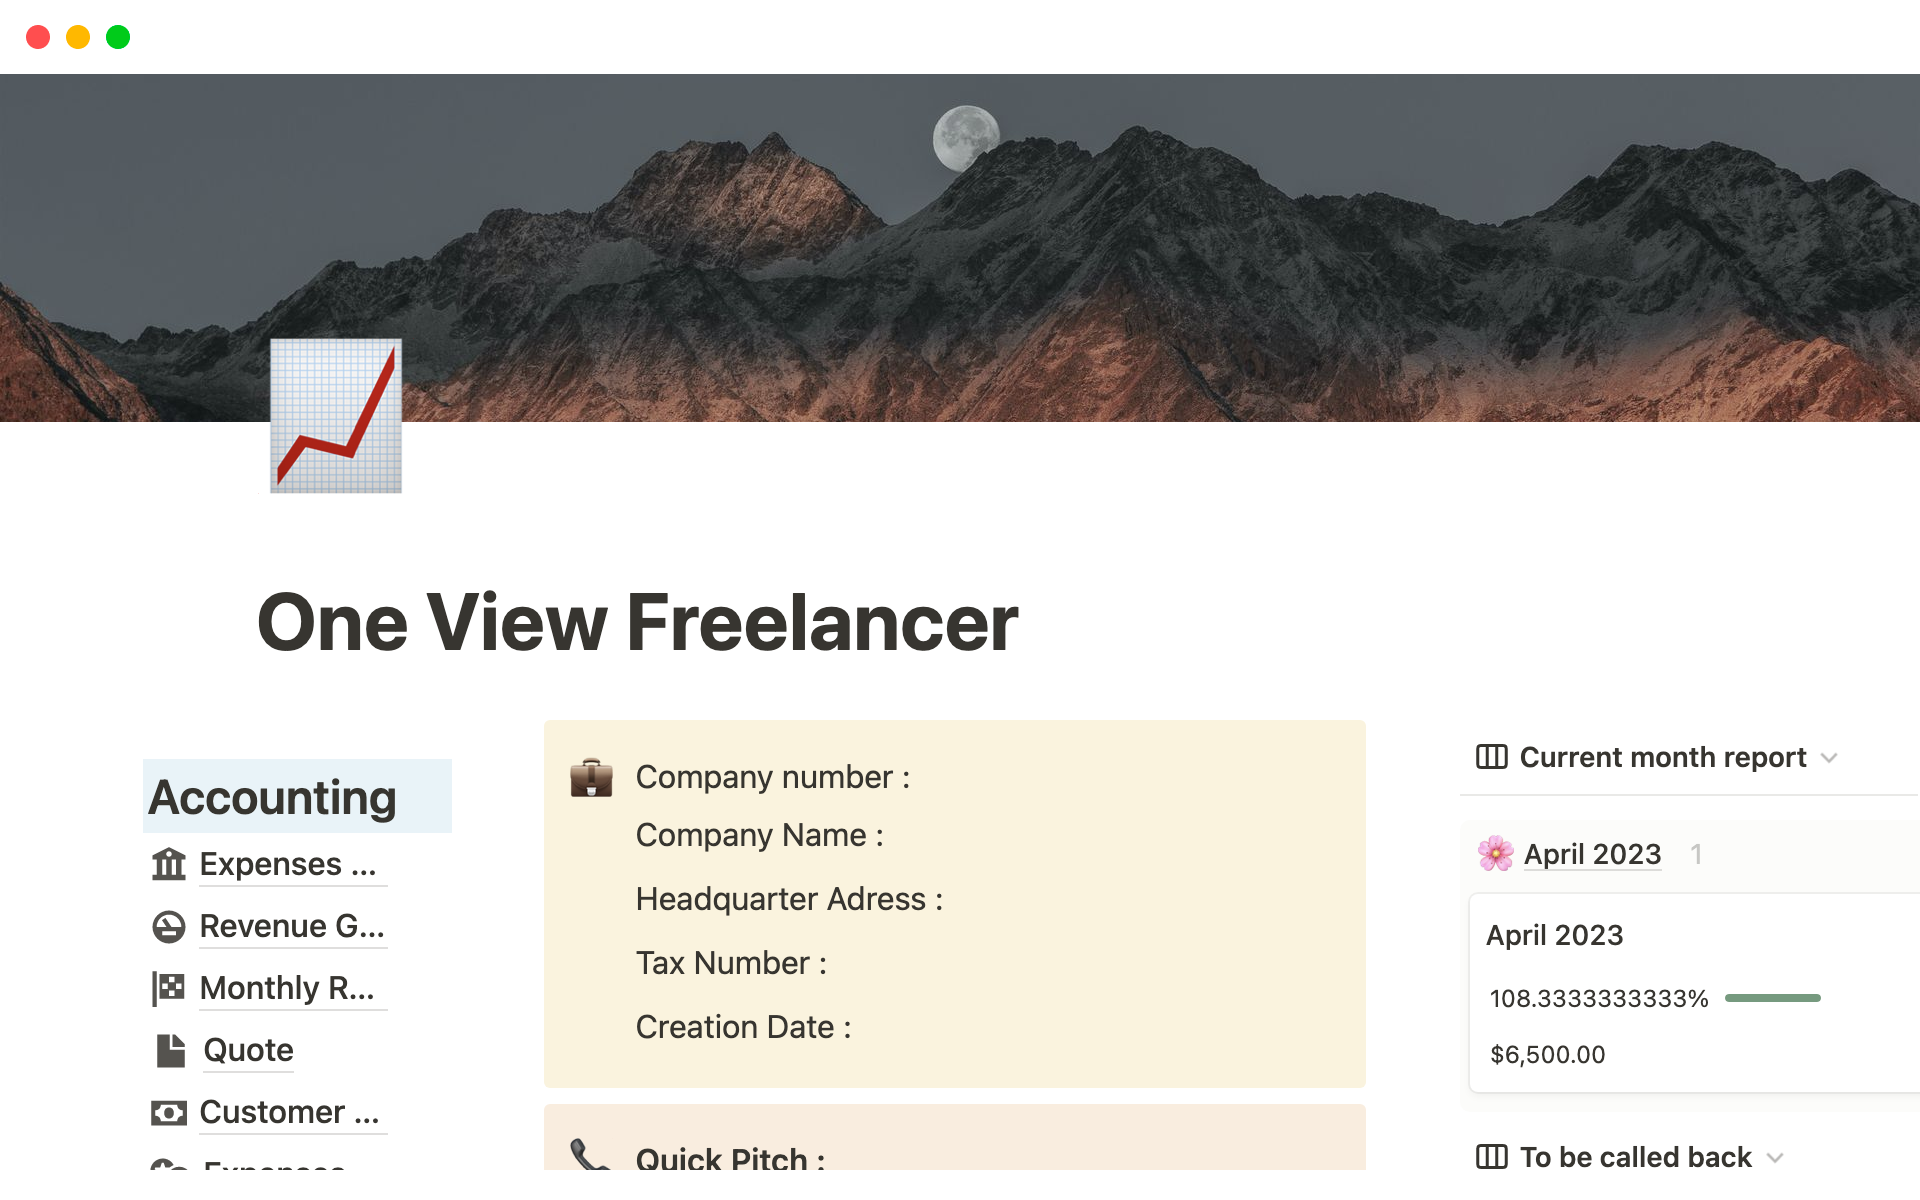 This templates helps you organize your freelancer life. You can see all important information in a blink (prospects to call back, late invoices, projects and revenue).